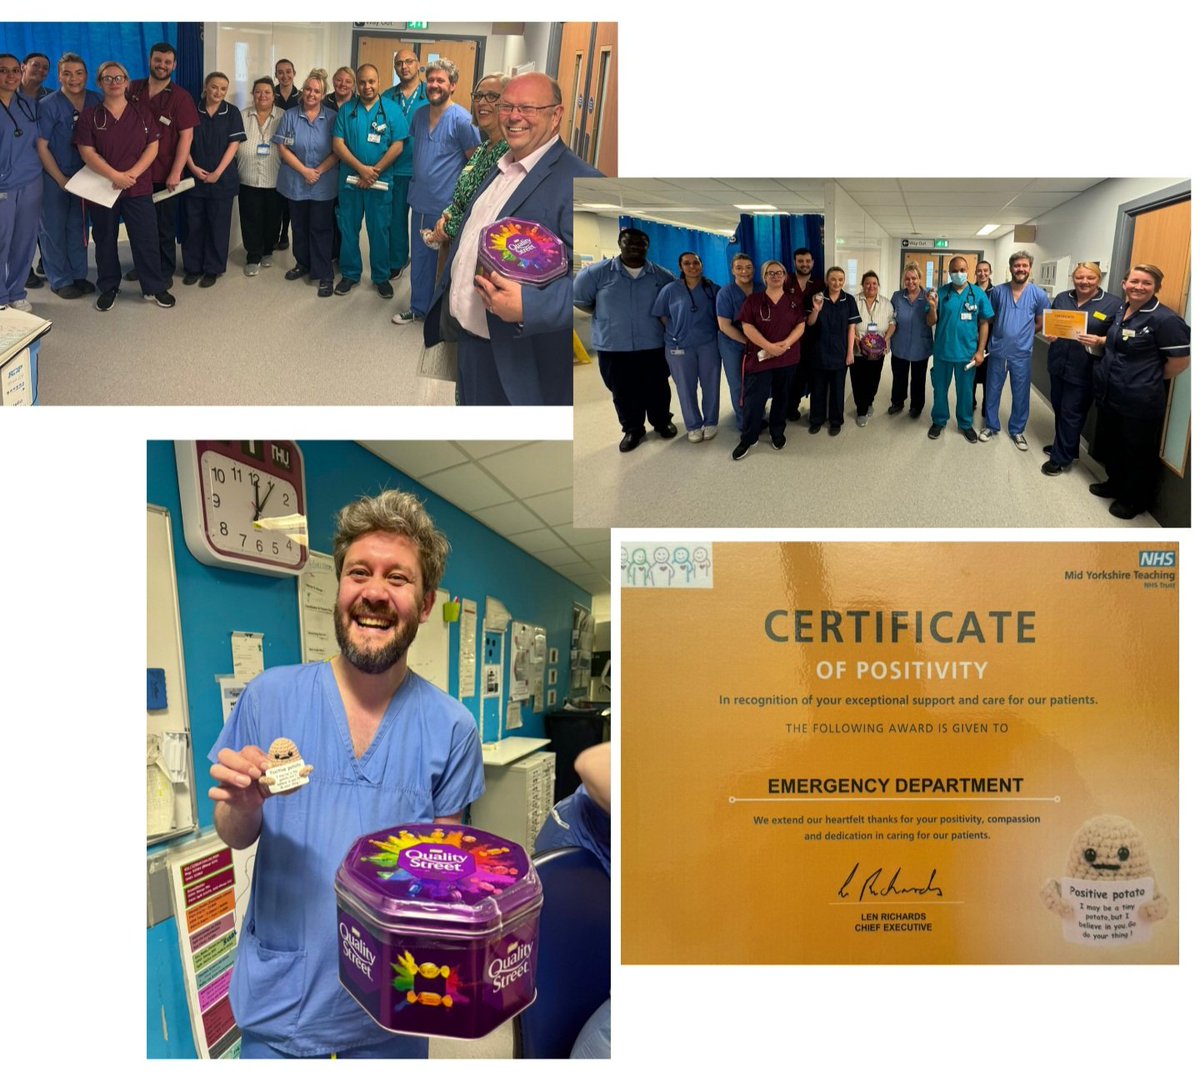 Today our fabulous Emergency Department team @MidYorkshireNHS were awarded a certificate of positivity for receiving the most compliments from patients and colleagues! Well done team, a real positive when you face such pressure day in day out! #NHS #EDTeam #MidYorks #MYTeam